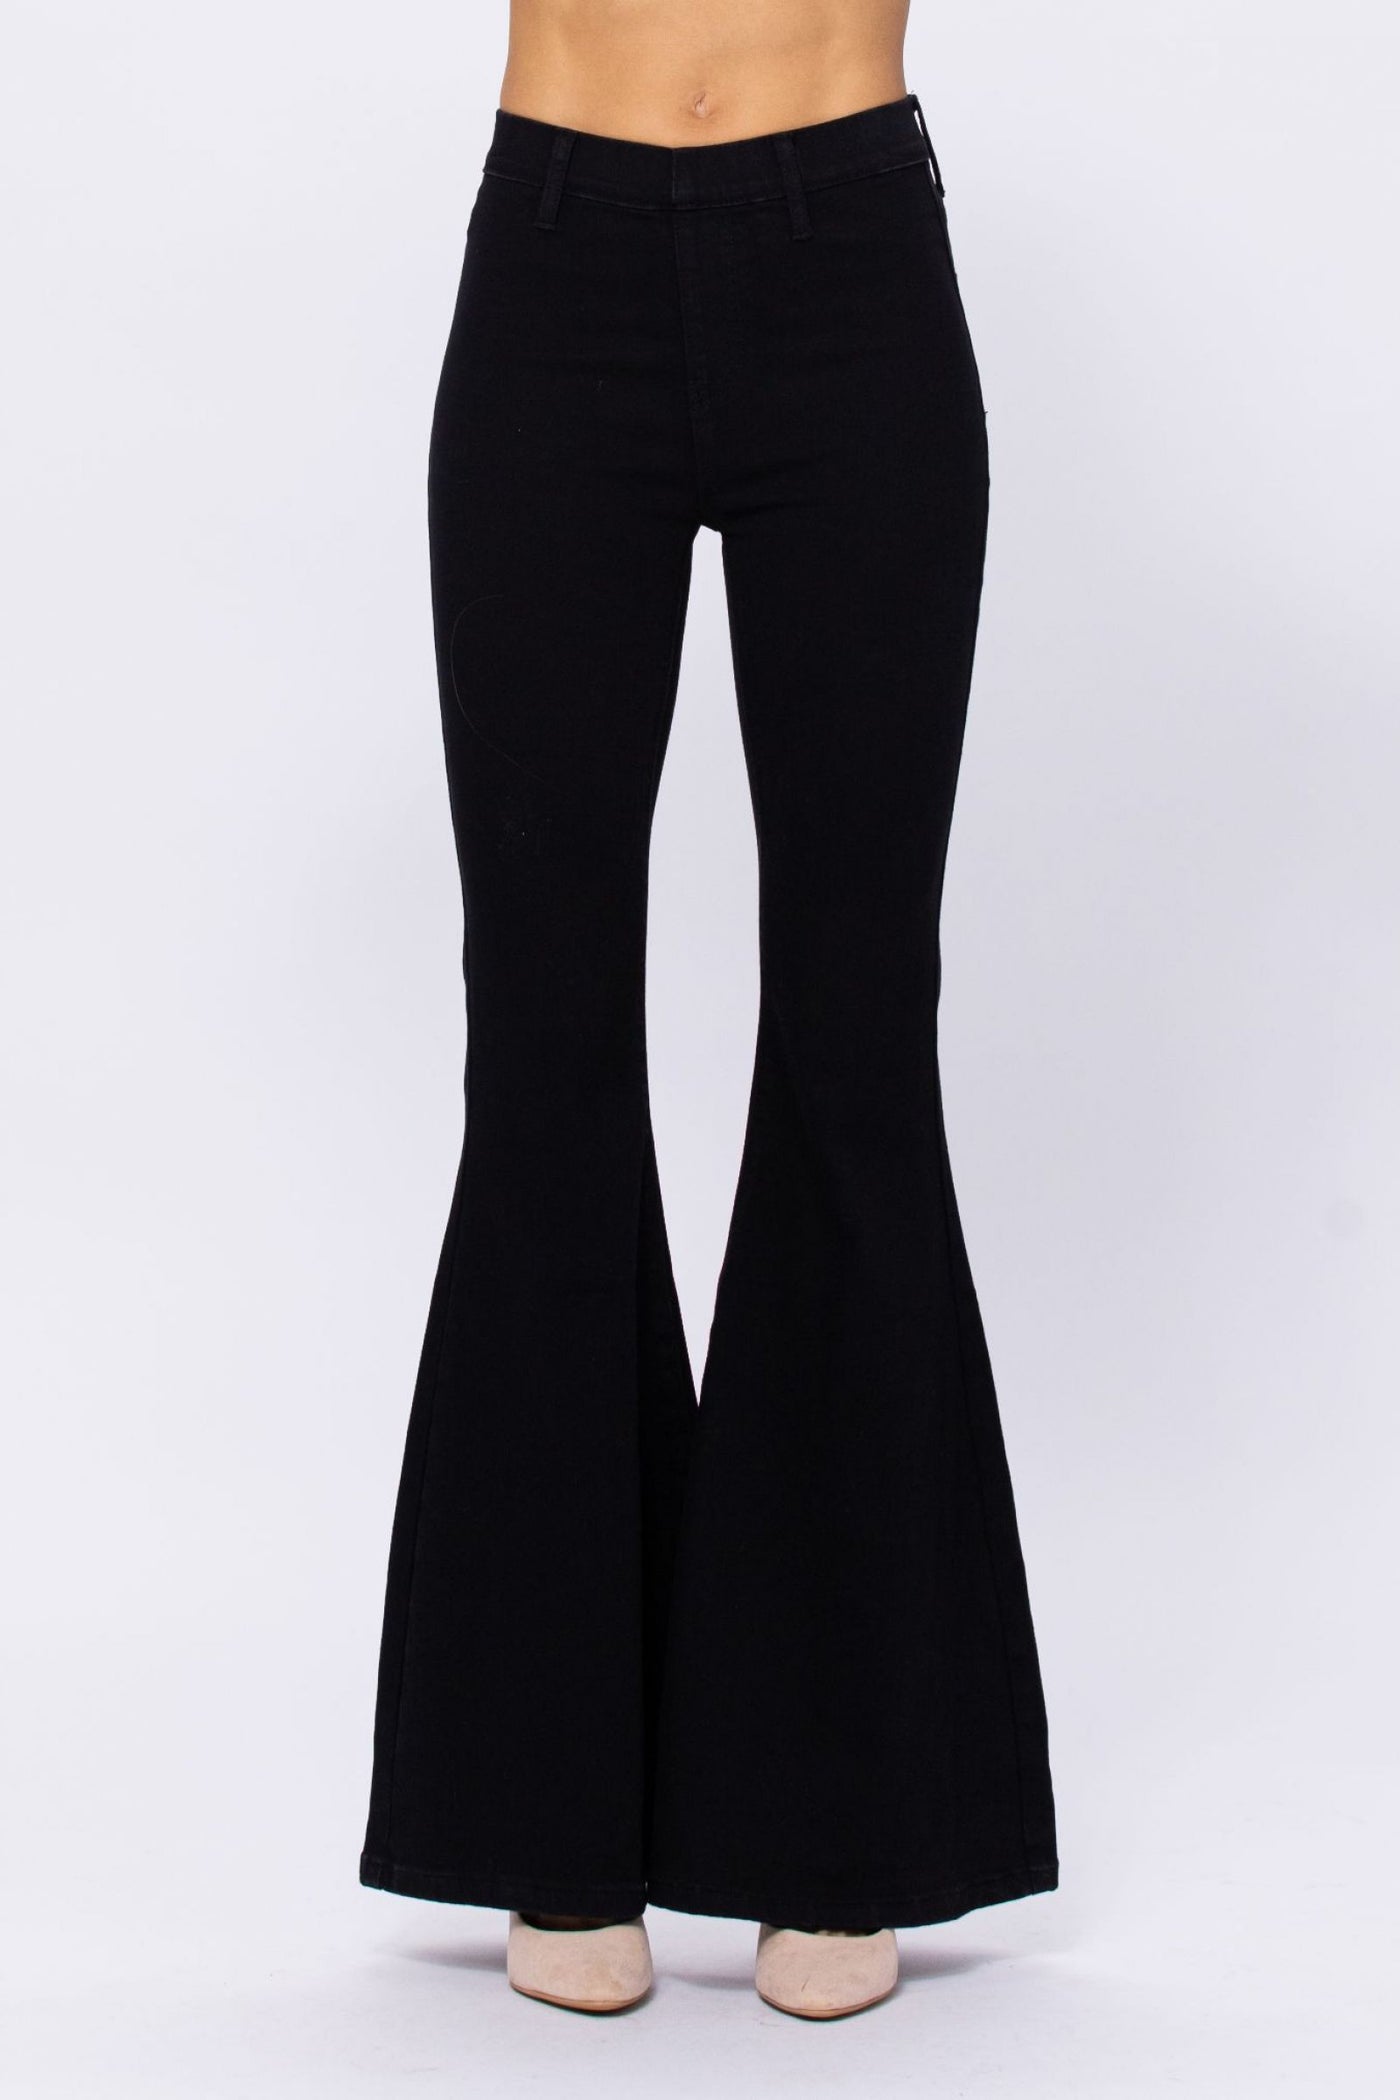 Judy Blue Pull-On Super Flares - Corinne Boutique Family Owned and Operated USA